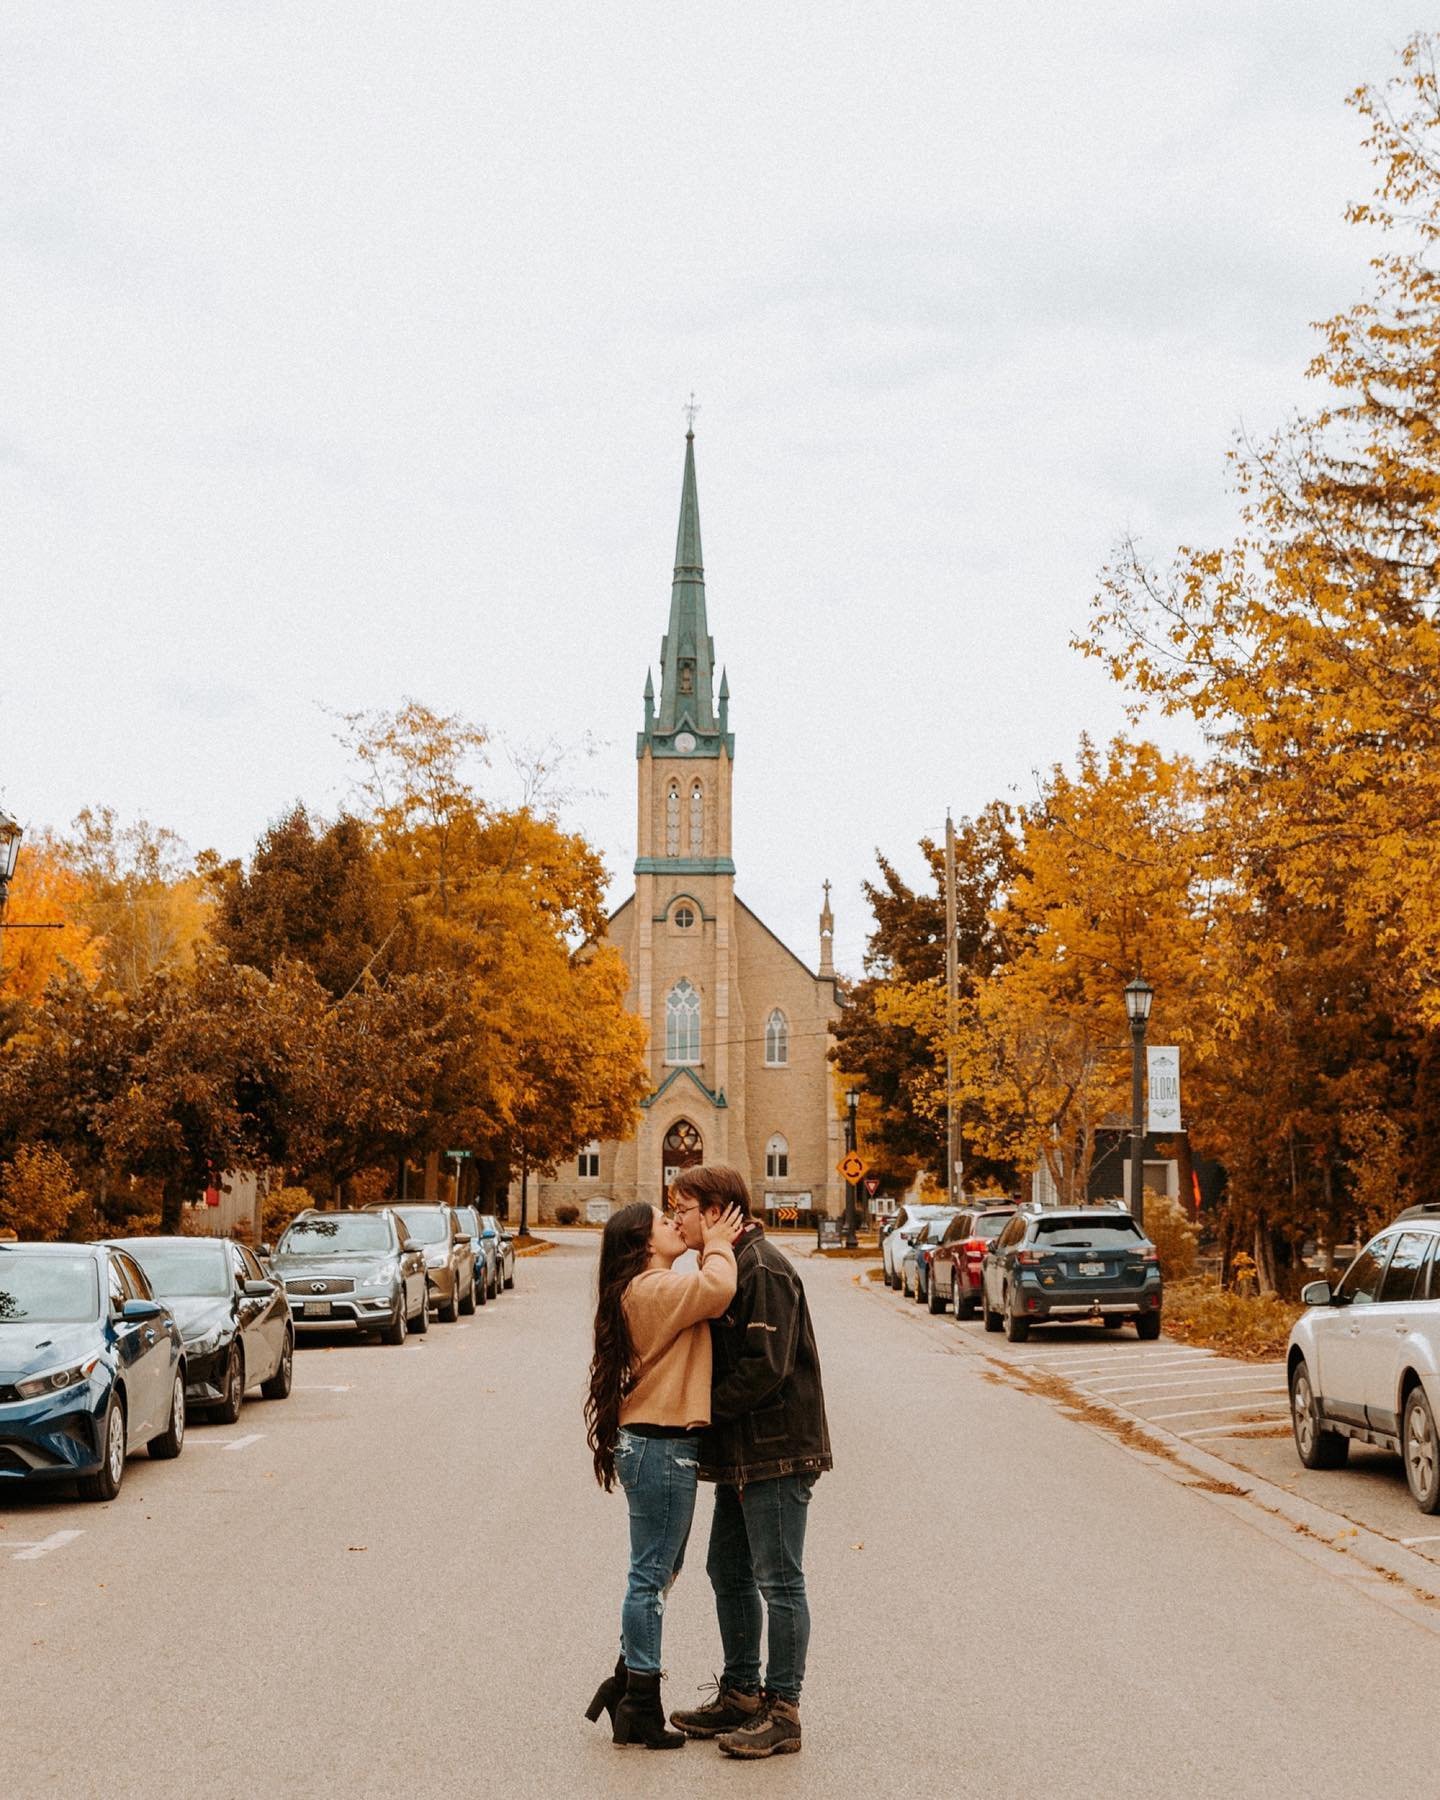 Ryan &amp; Tamera&rsquo;s gorgeous fall engagement is on the blog!
.
We explored Elora Gorge before making our way into town.  As I was driving to our session, I drove passed this street with this church at the end and knew I had to bring them here f